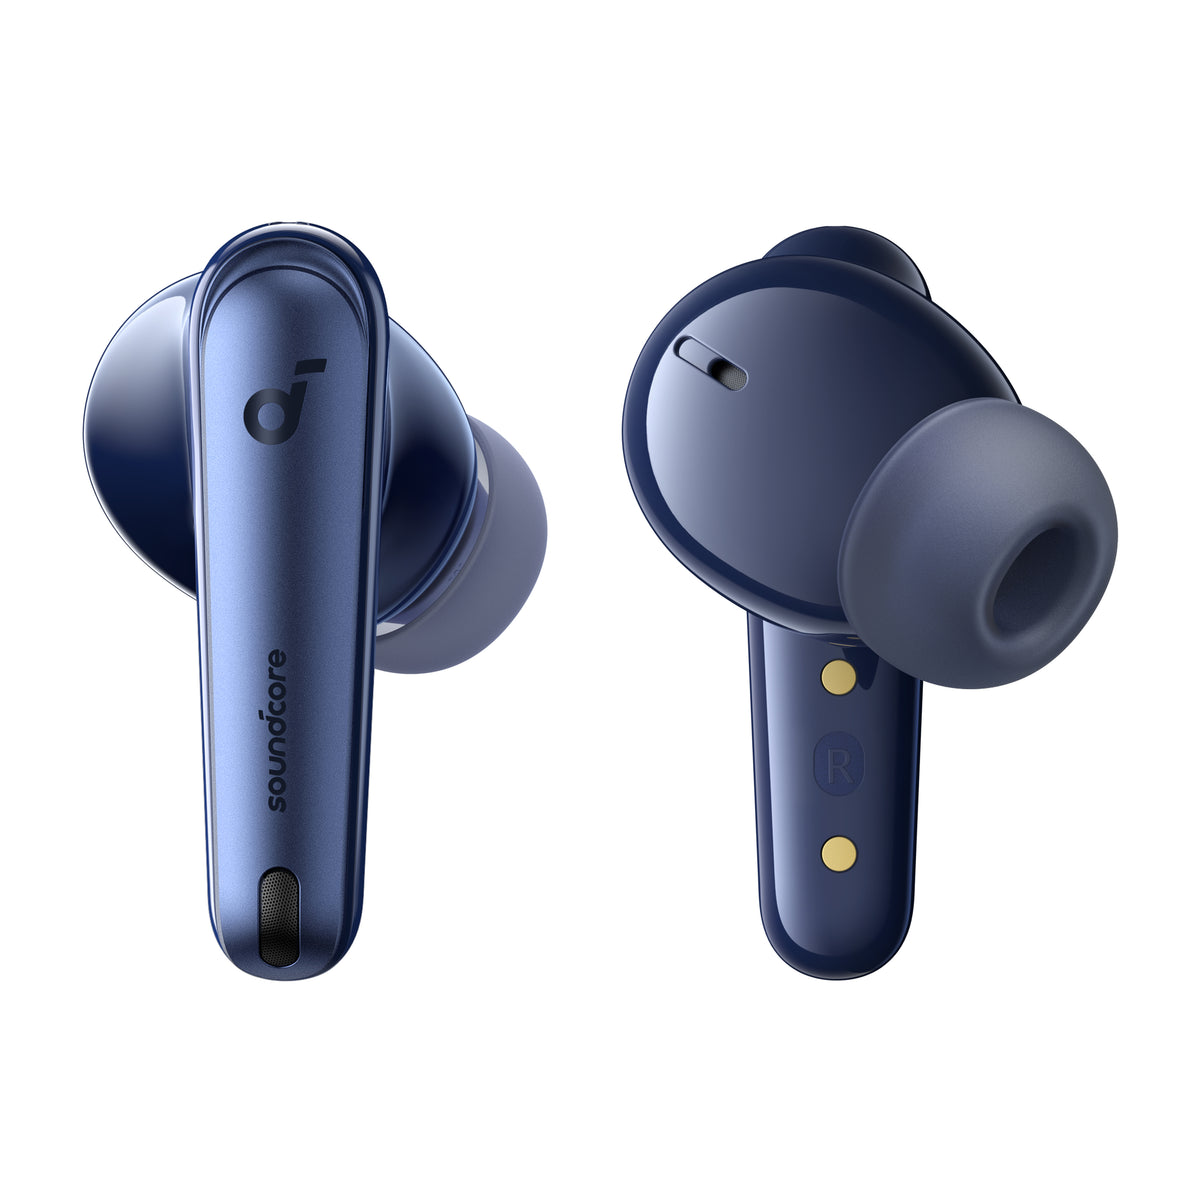 Liberty 4 NC Left and Right Replacement Earbuds - Navy Blue - soundcore US